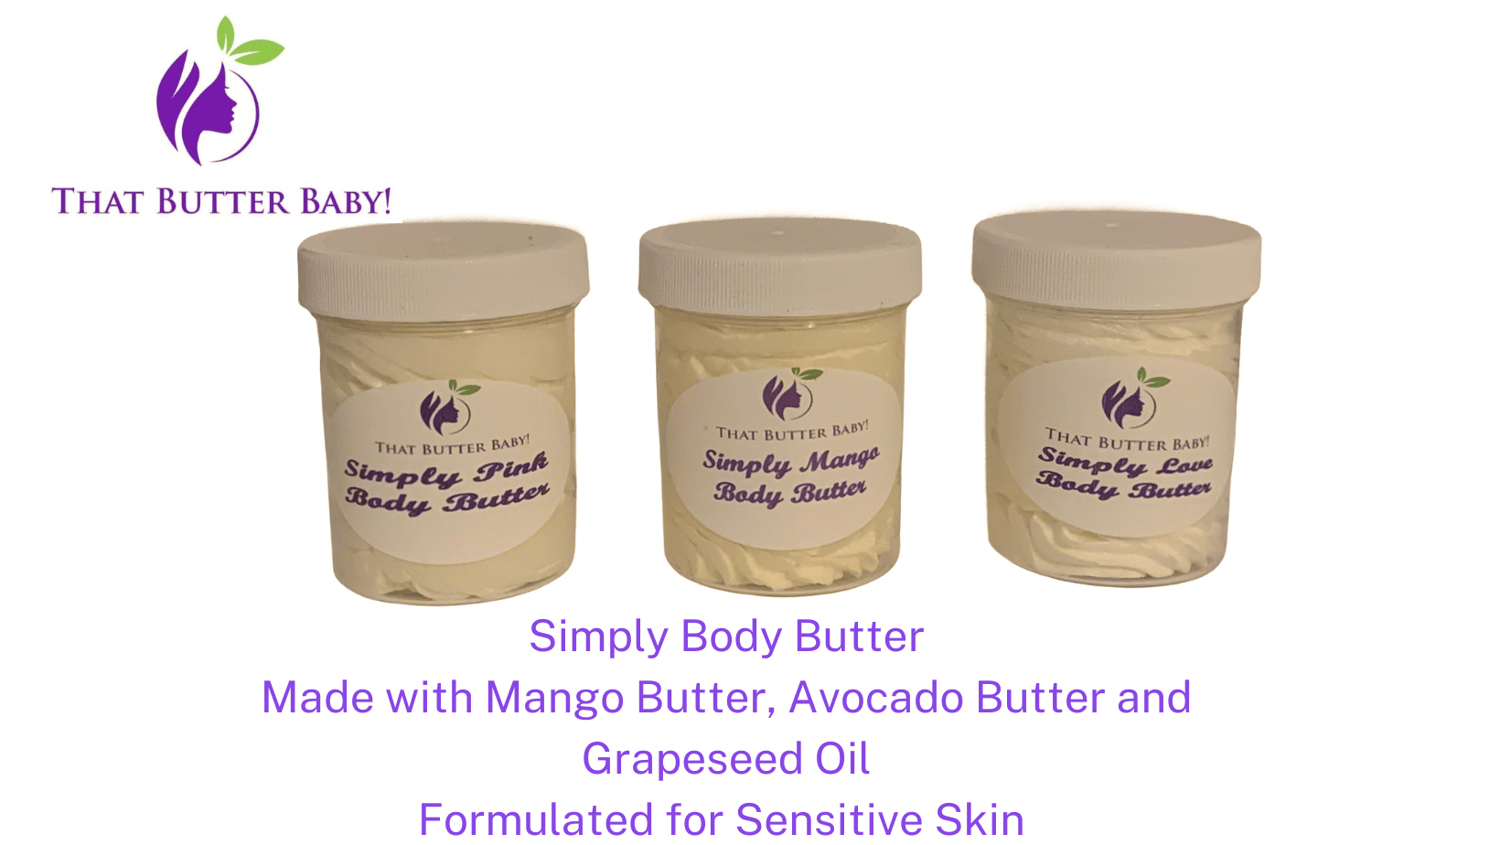 TBB SIMPLY BODY BUTTER | Butter Baby That